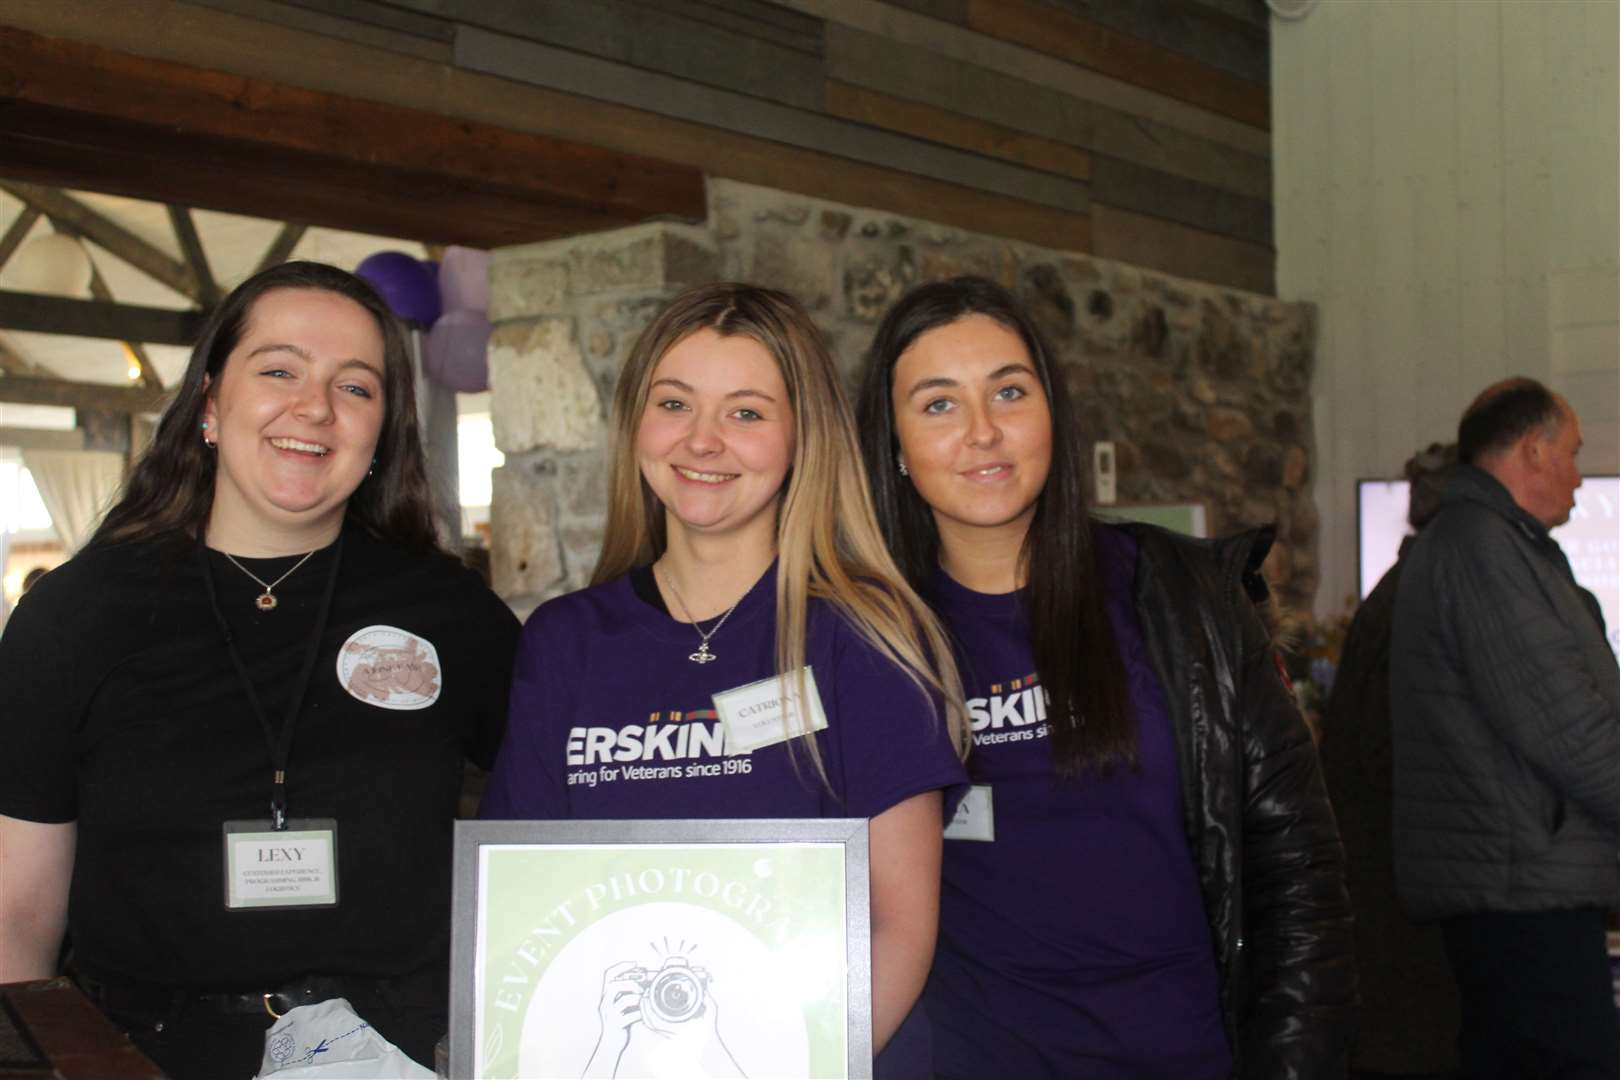 The welcoming trio at the barn door of Sunday's fine fair at Barra castle (from left) are: RGU students Lexy Graham, Catriona Stephenson and Sofia Malinowski. Picture: Griselda McGregor